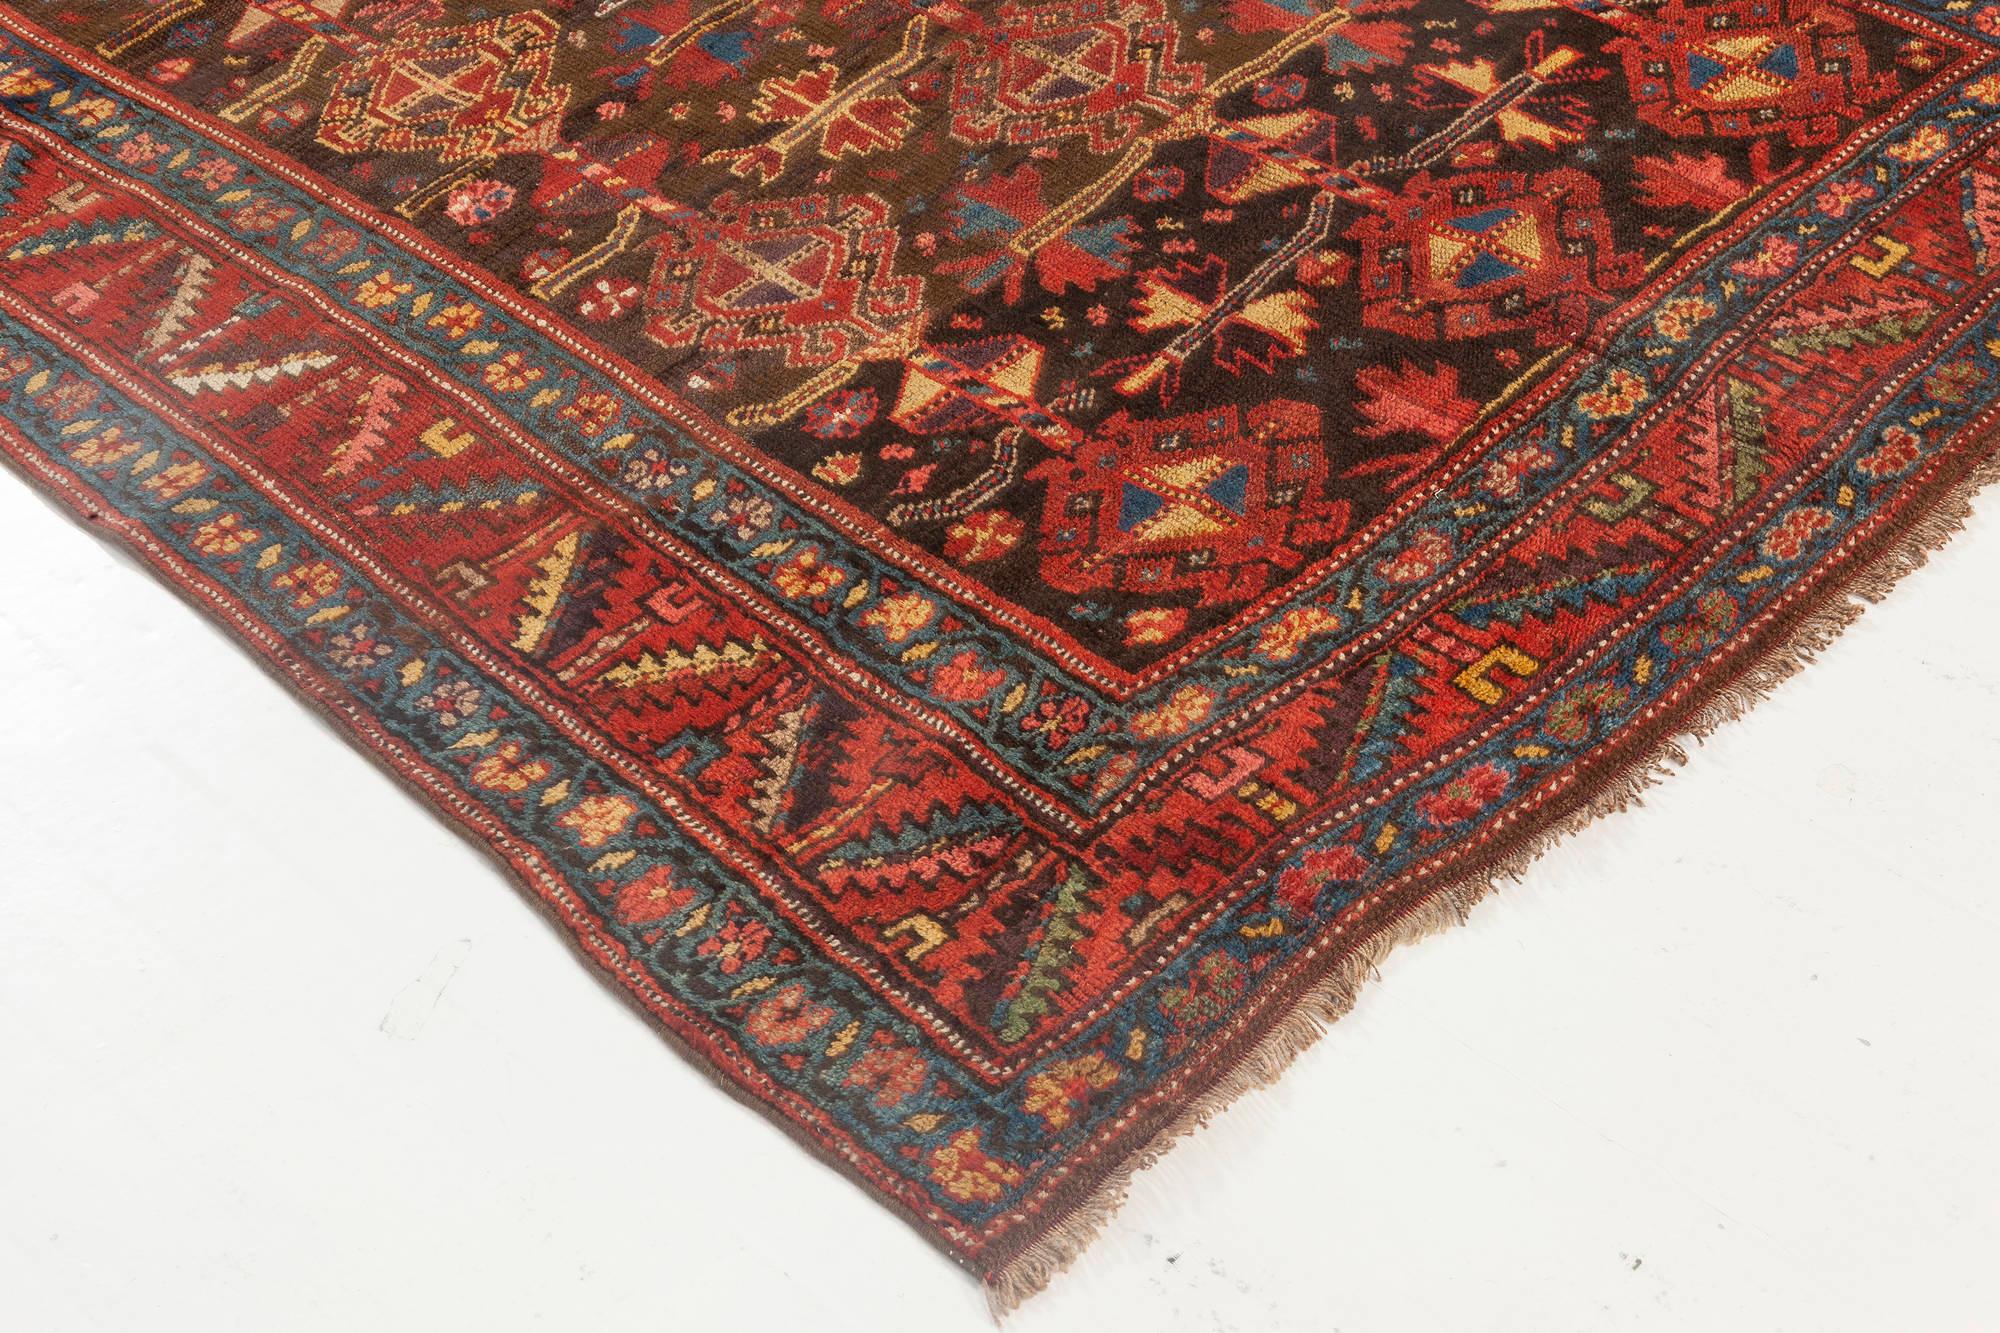 1900s Persian Malayer Geometric Handmade Wool Rug in Red, Blue, Yellow and Black 1